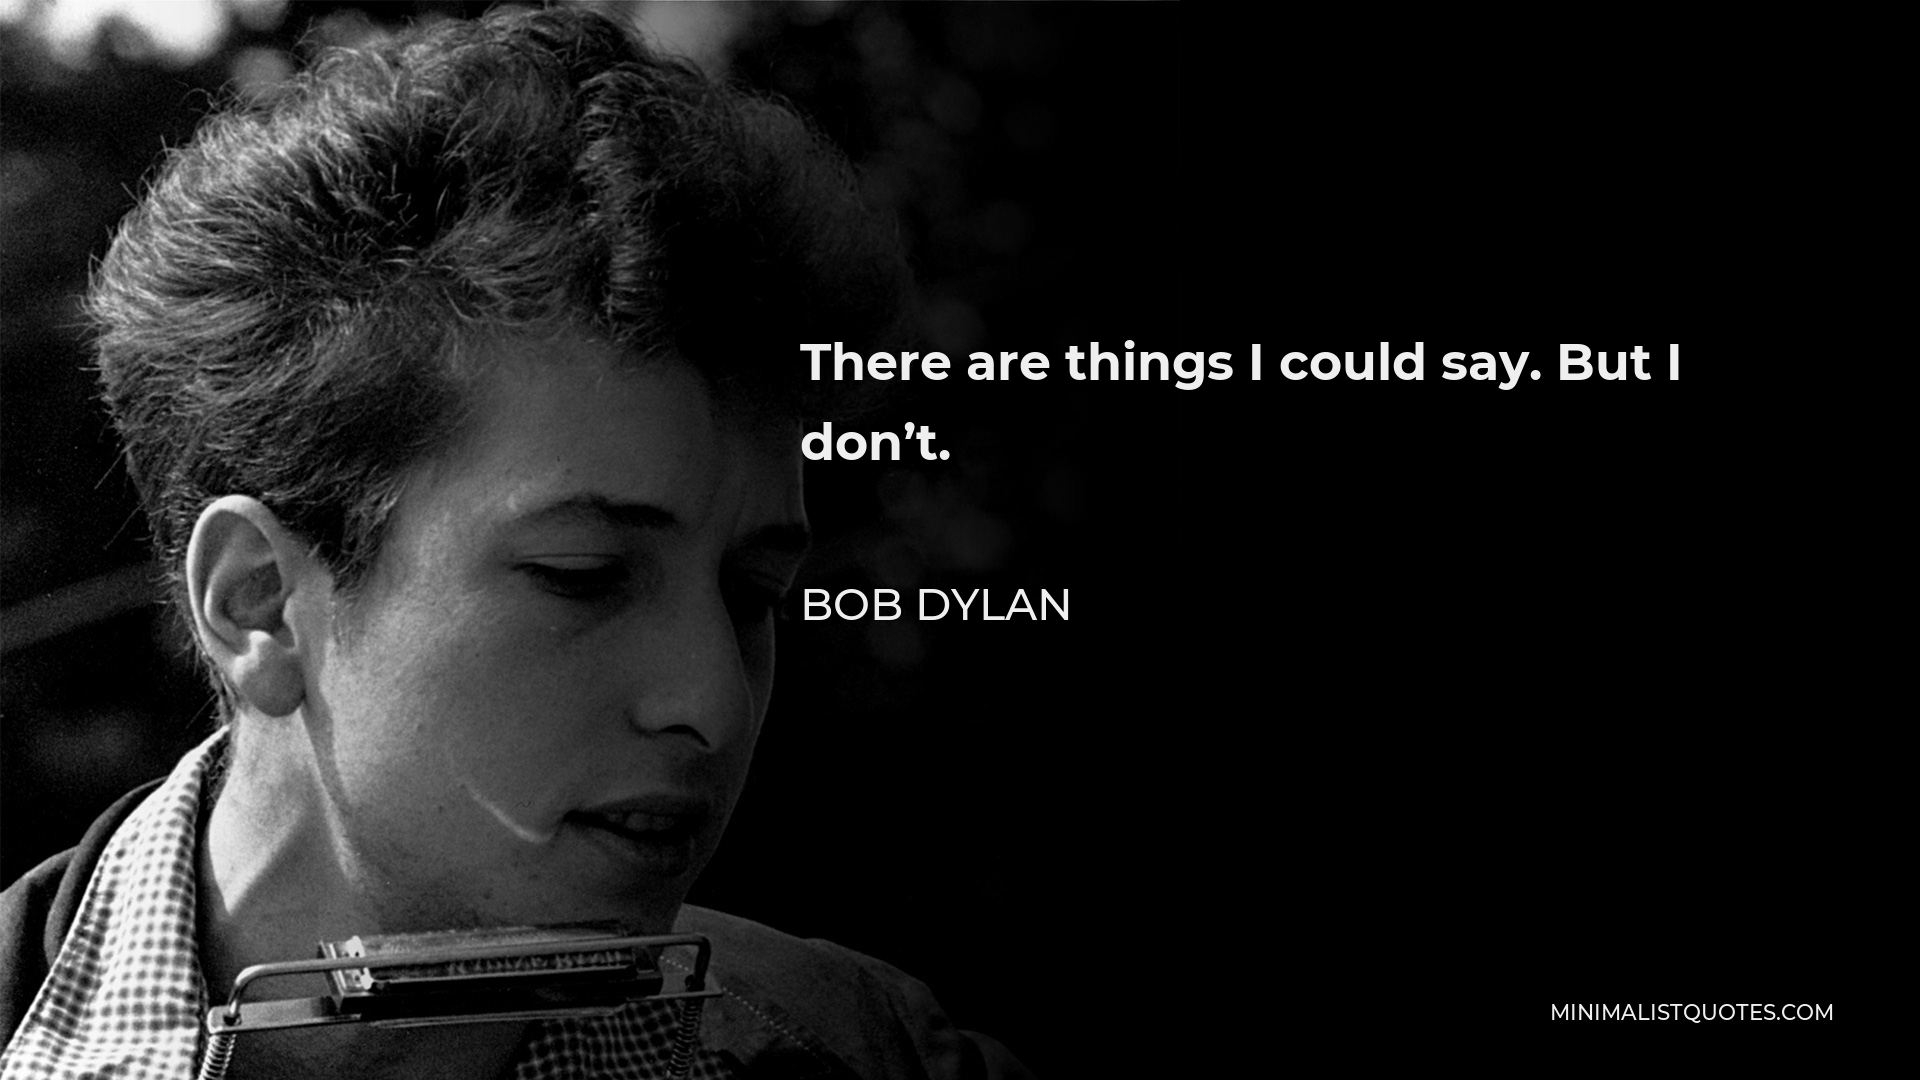 Bob Dylan Quote - There are things I could say. But I don’t.